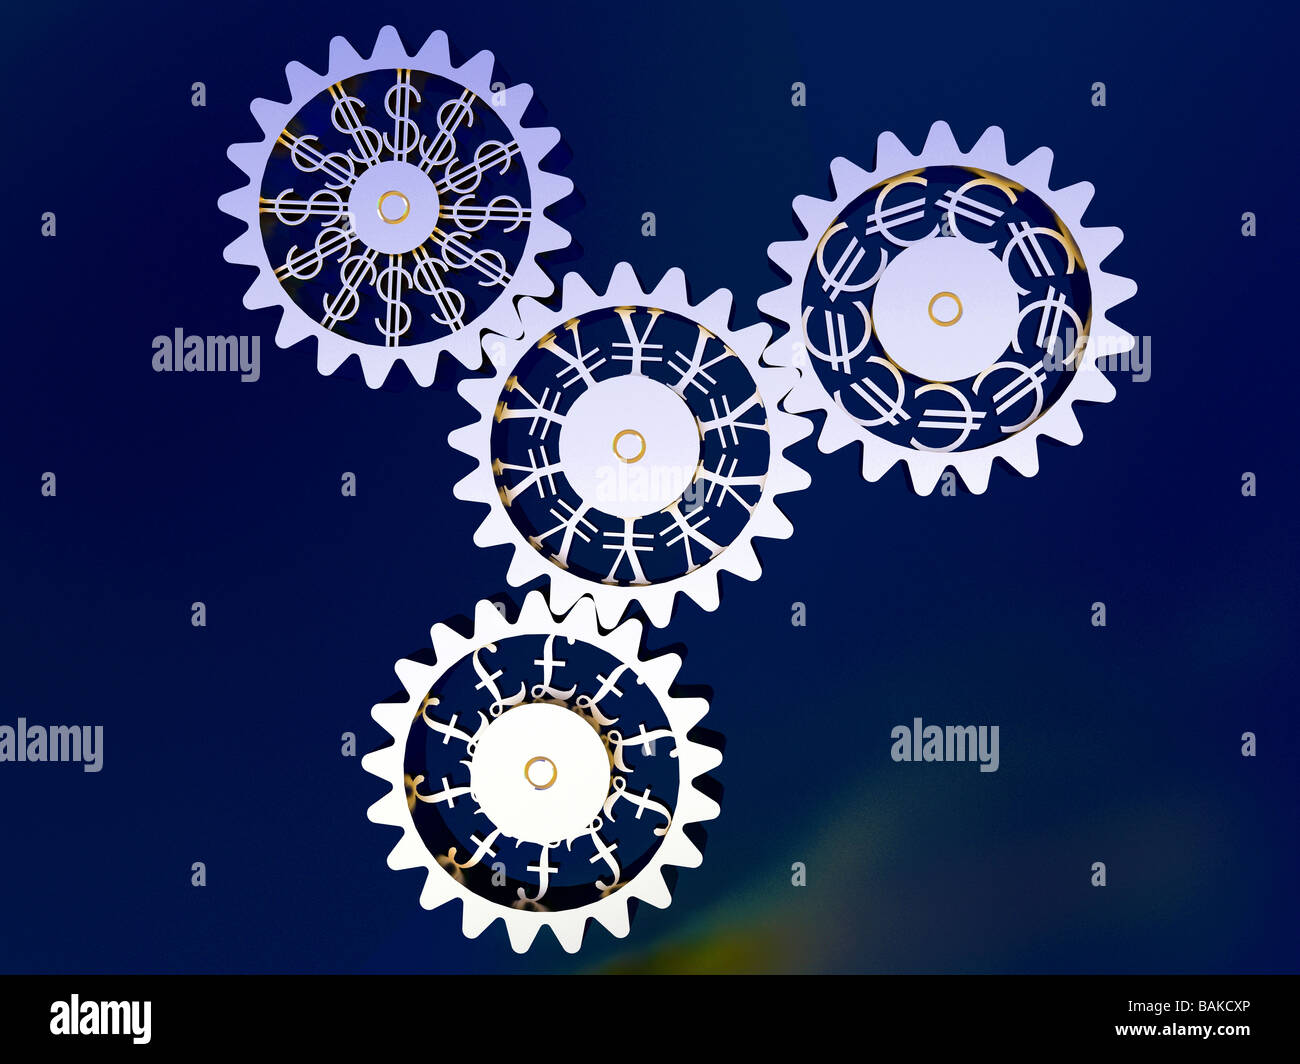 Realistic 3D rendering of  the dollar, yen, pound sterling, and euro as gears meshed together.  Dark blue background. Stock Photo